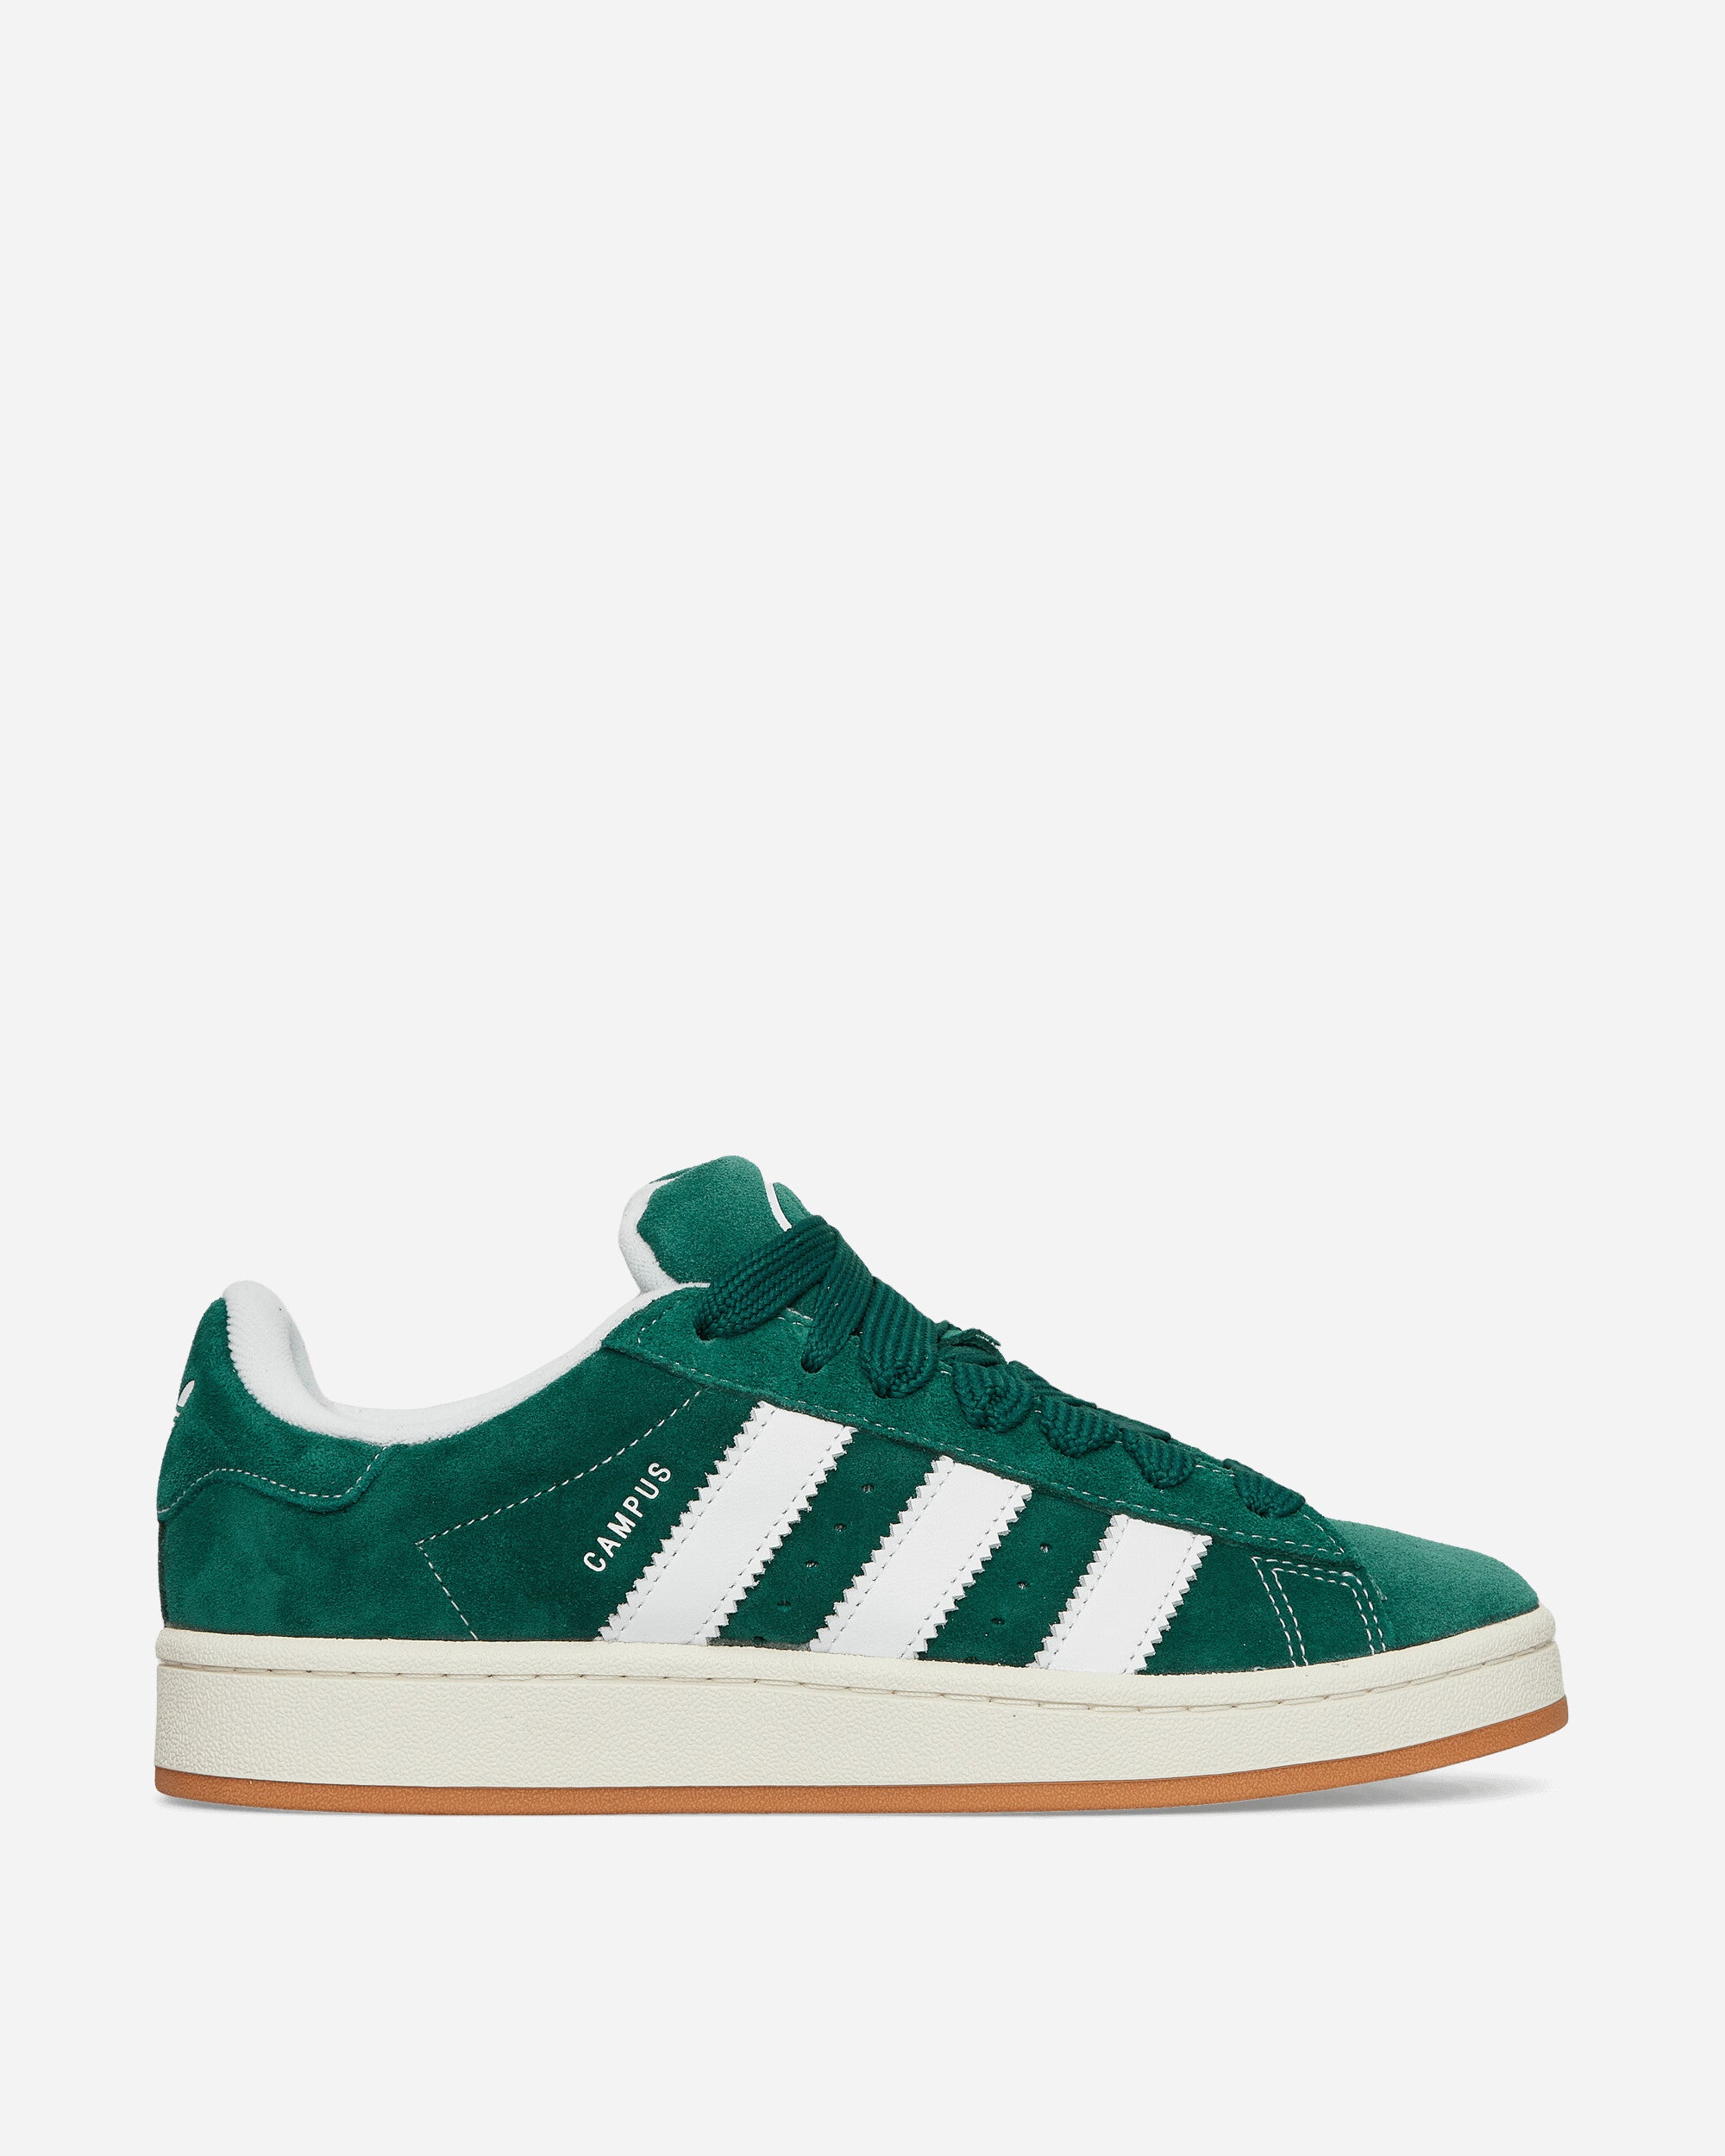 adidas Campus 00S Drkgrn/Ftwwht Sneakers Low H03472 001